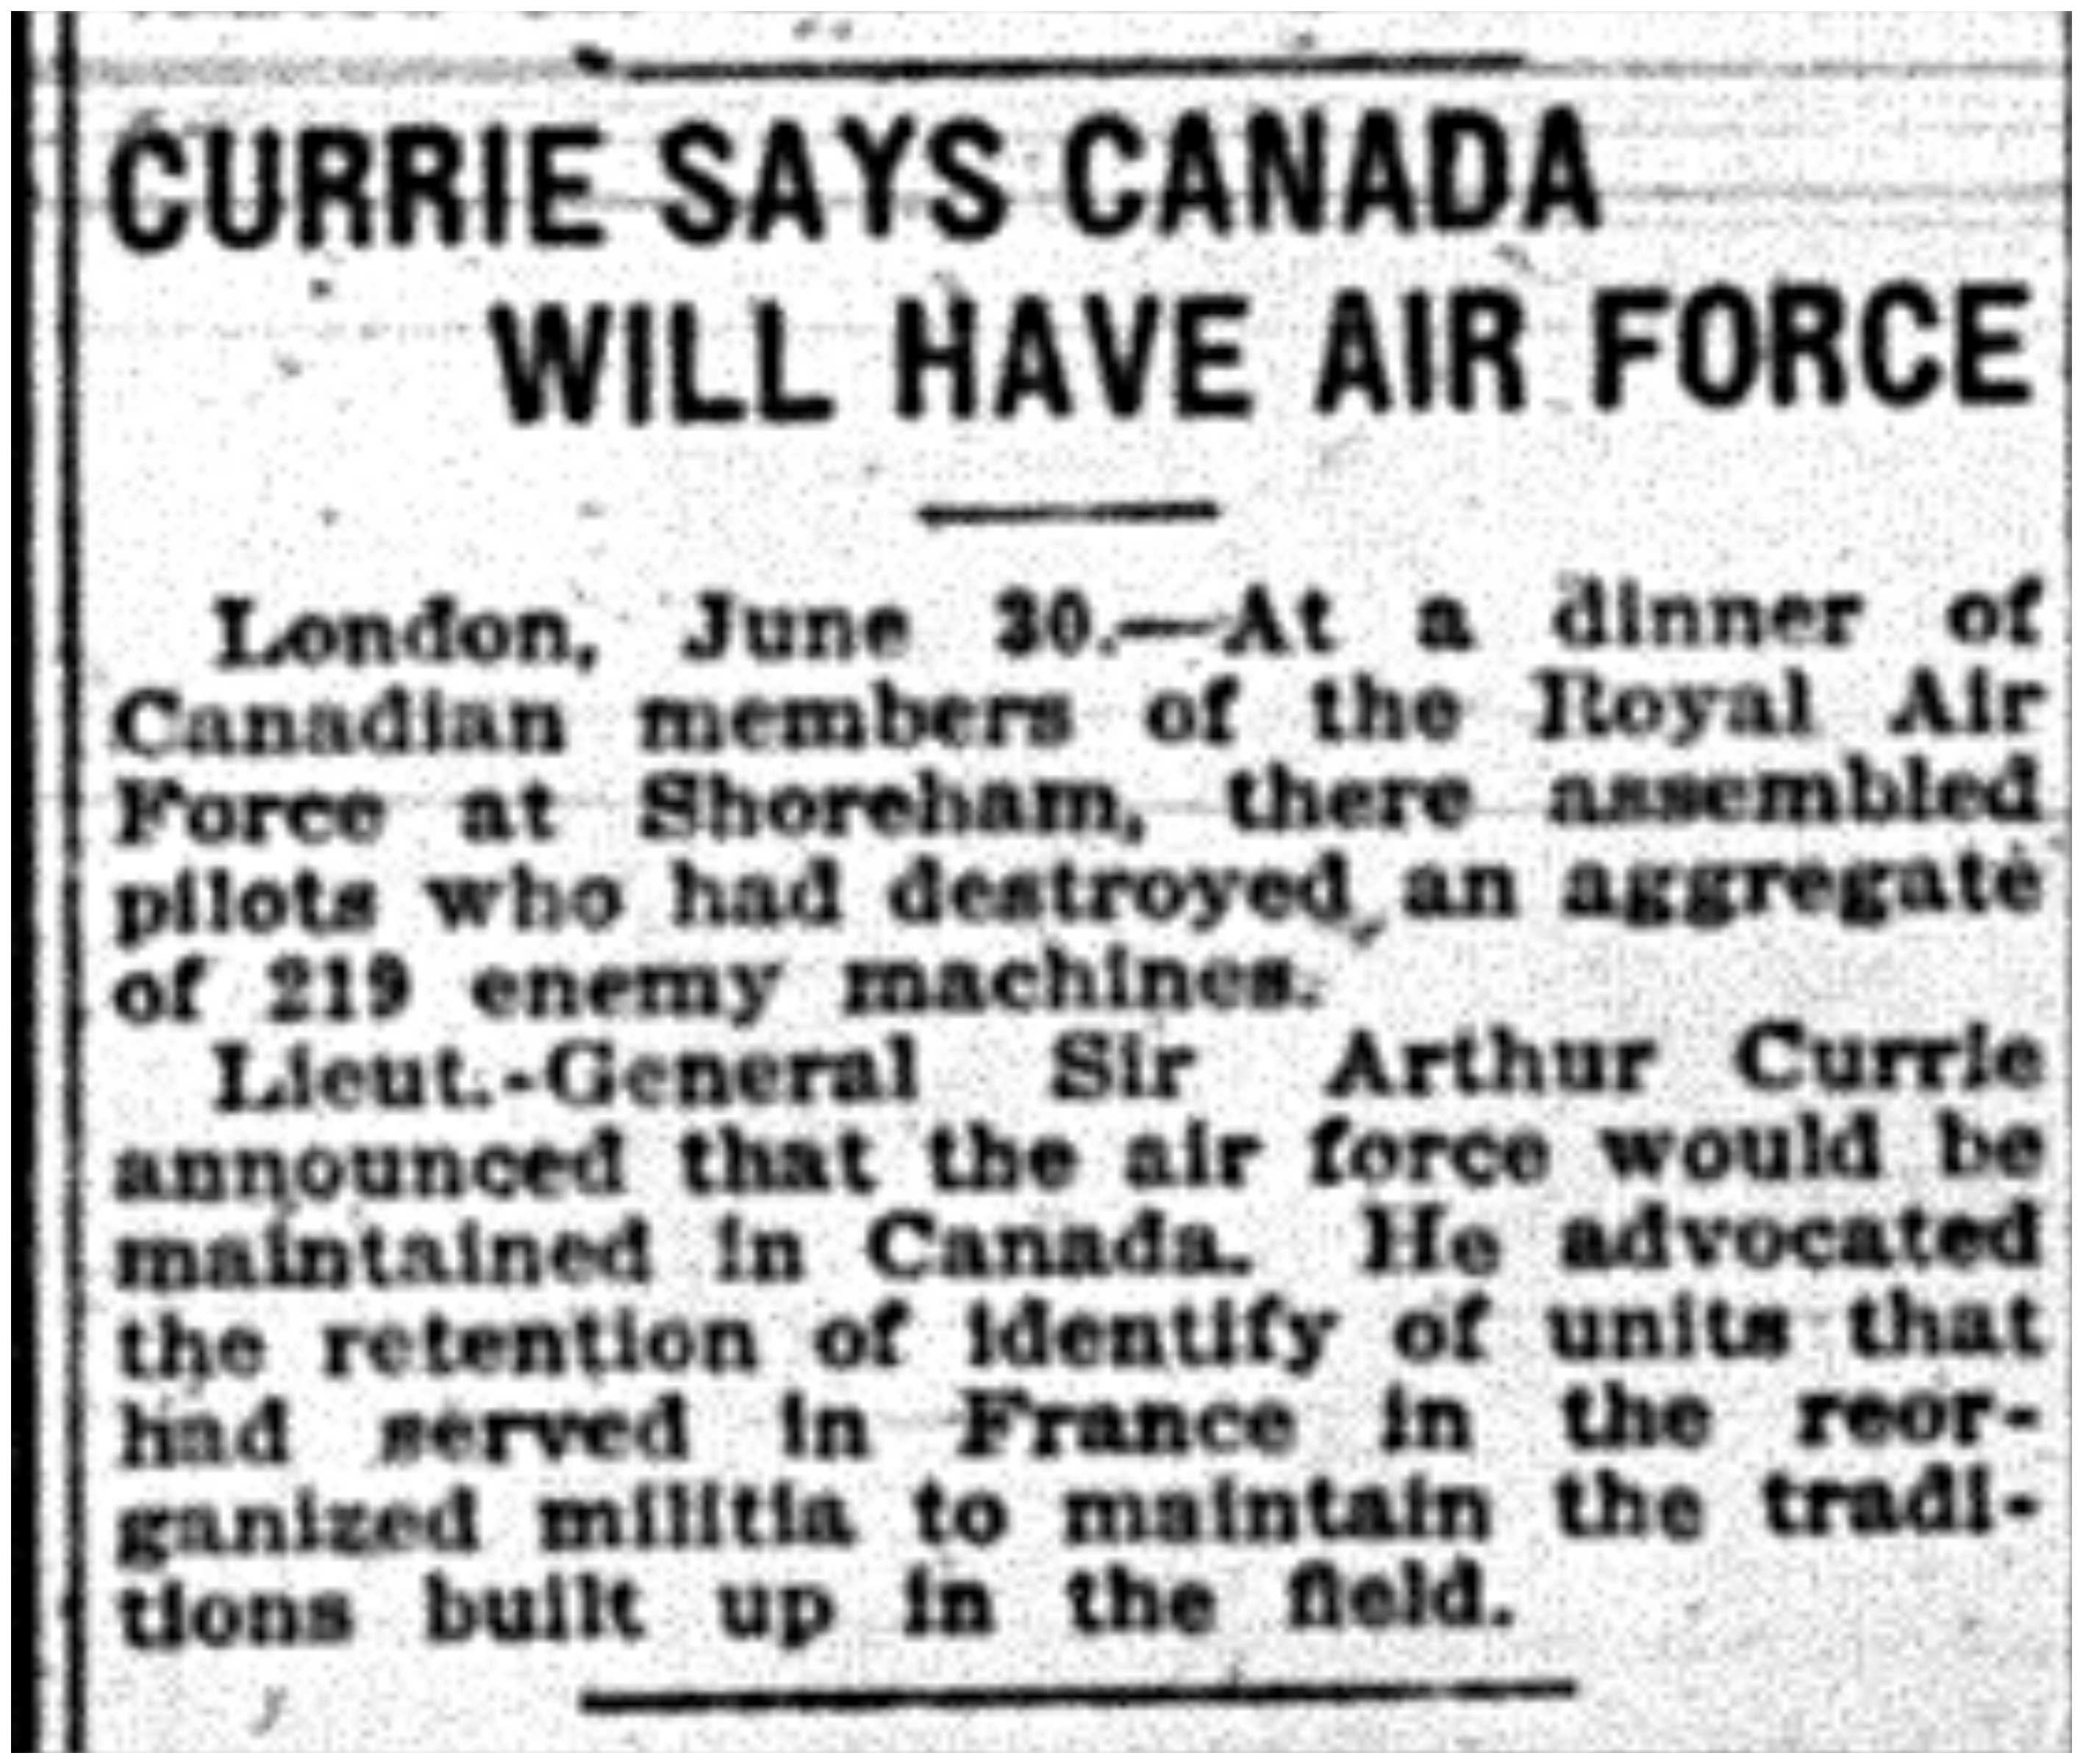 "Currie Says Canada Will Have Air Force"